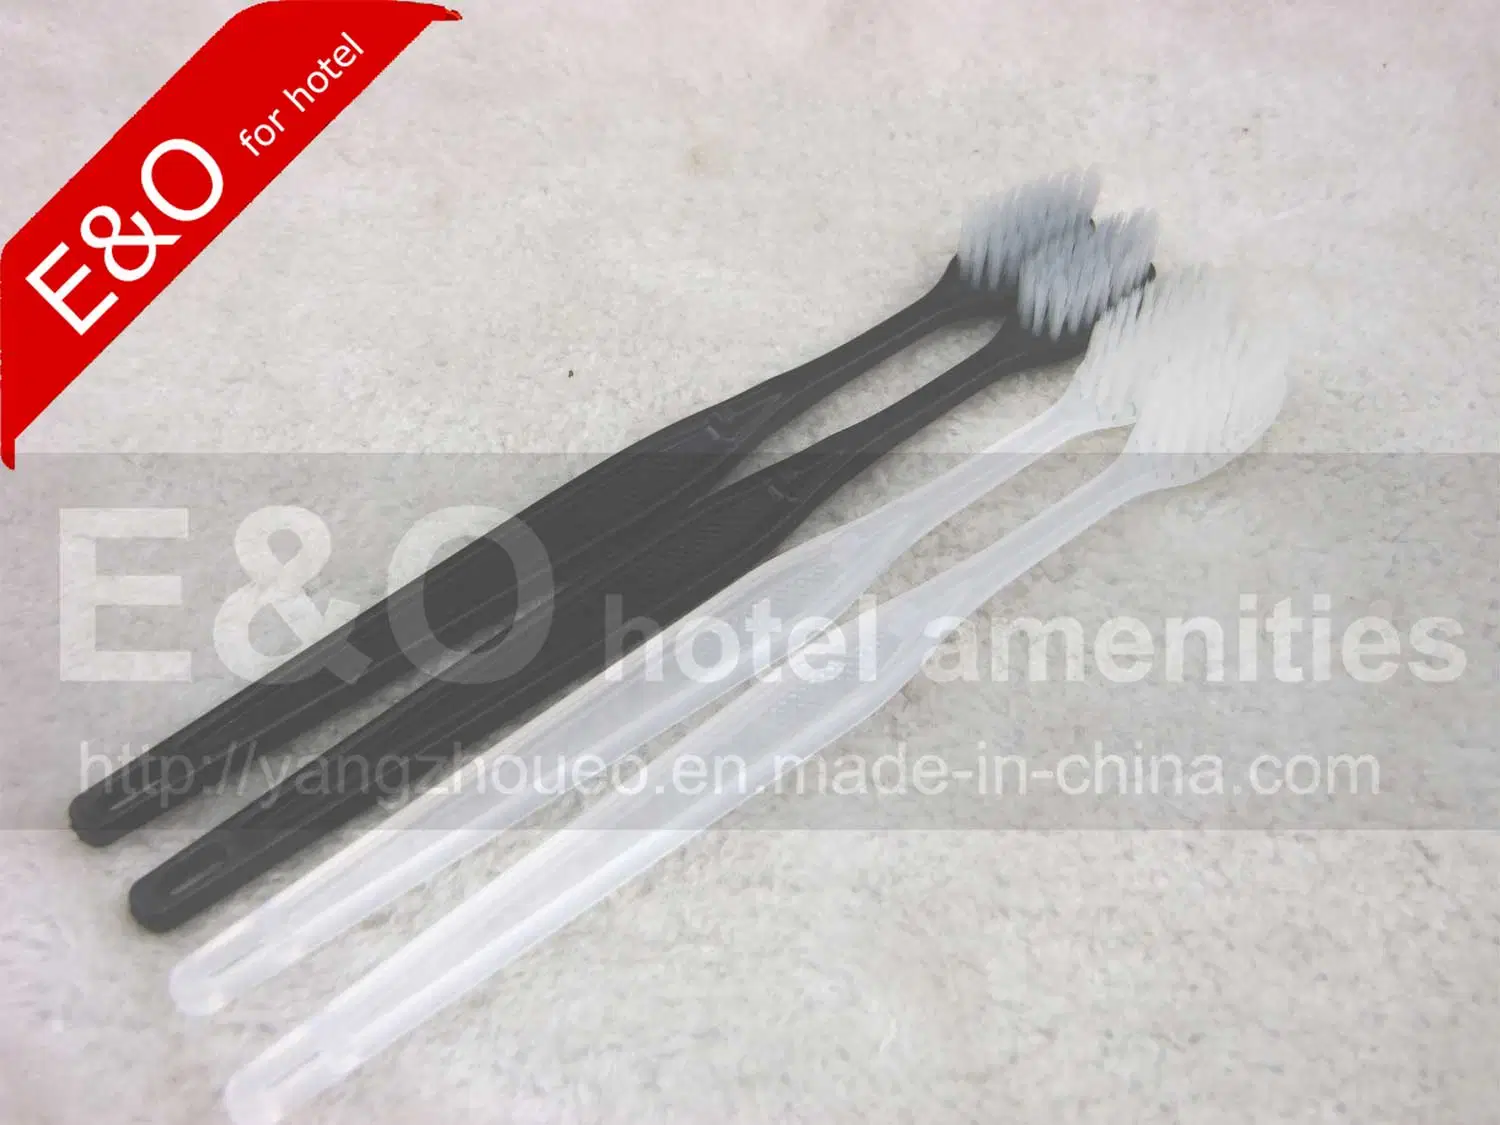 Adult Daily Personal Care Hotel Amentities Toothbrush